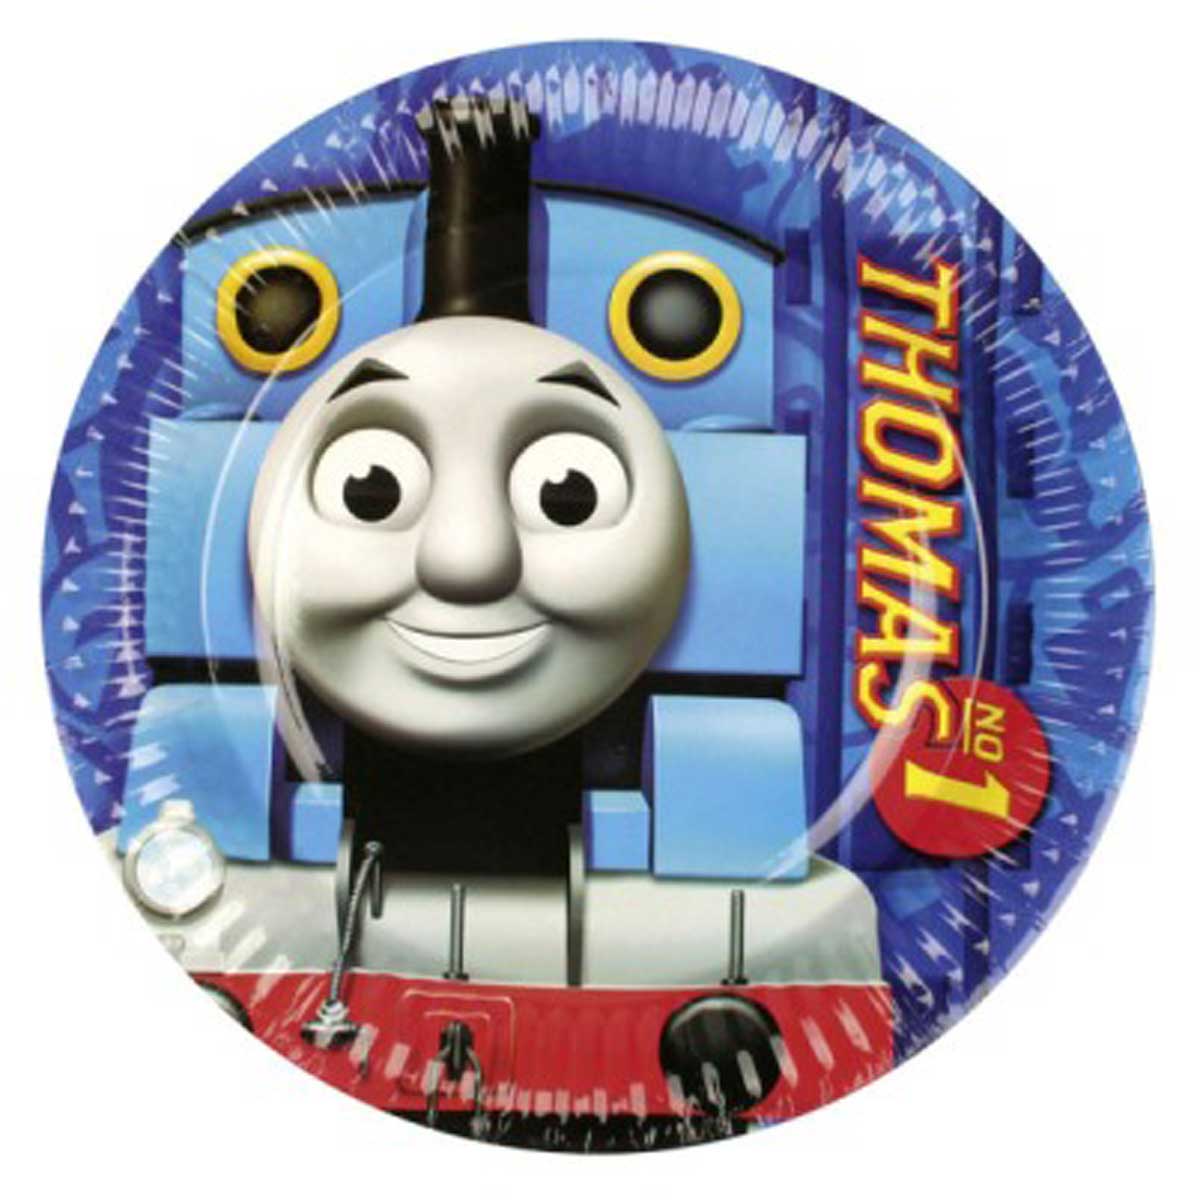 Thomas And Friends Plates 7in, 8pcs Printed Tableware - Party Centre